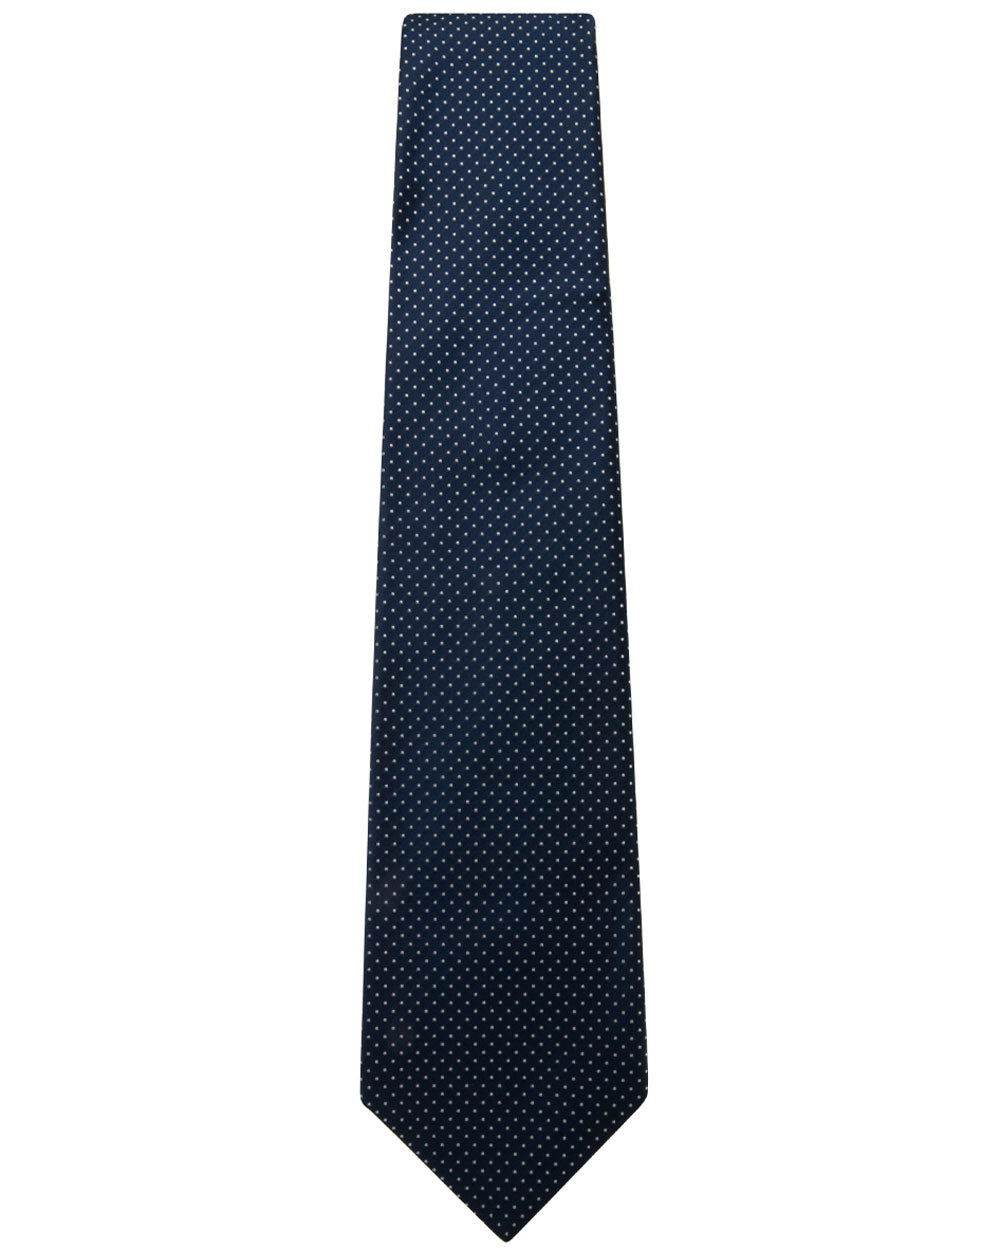 Navy Blue and Silver Polka Dot Tie